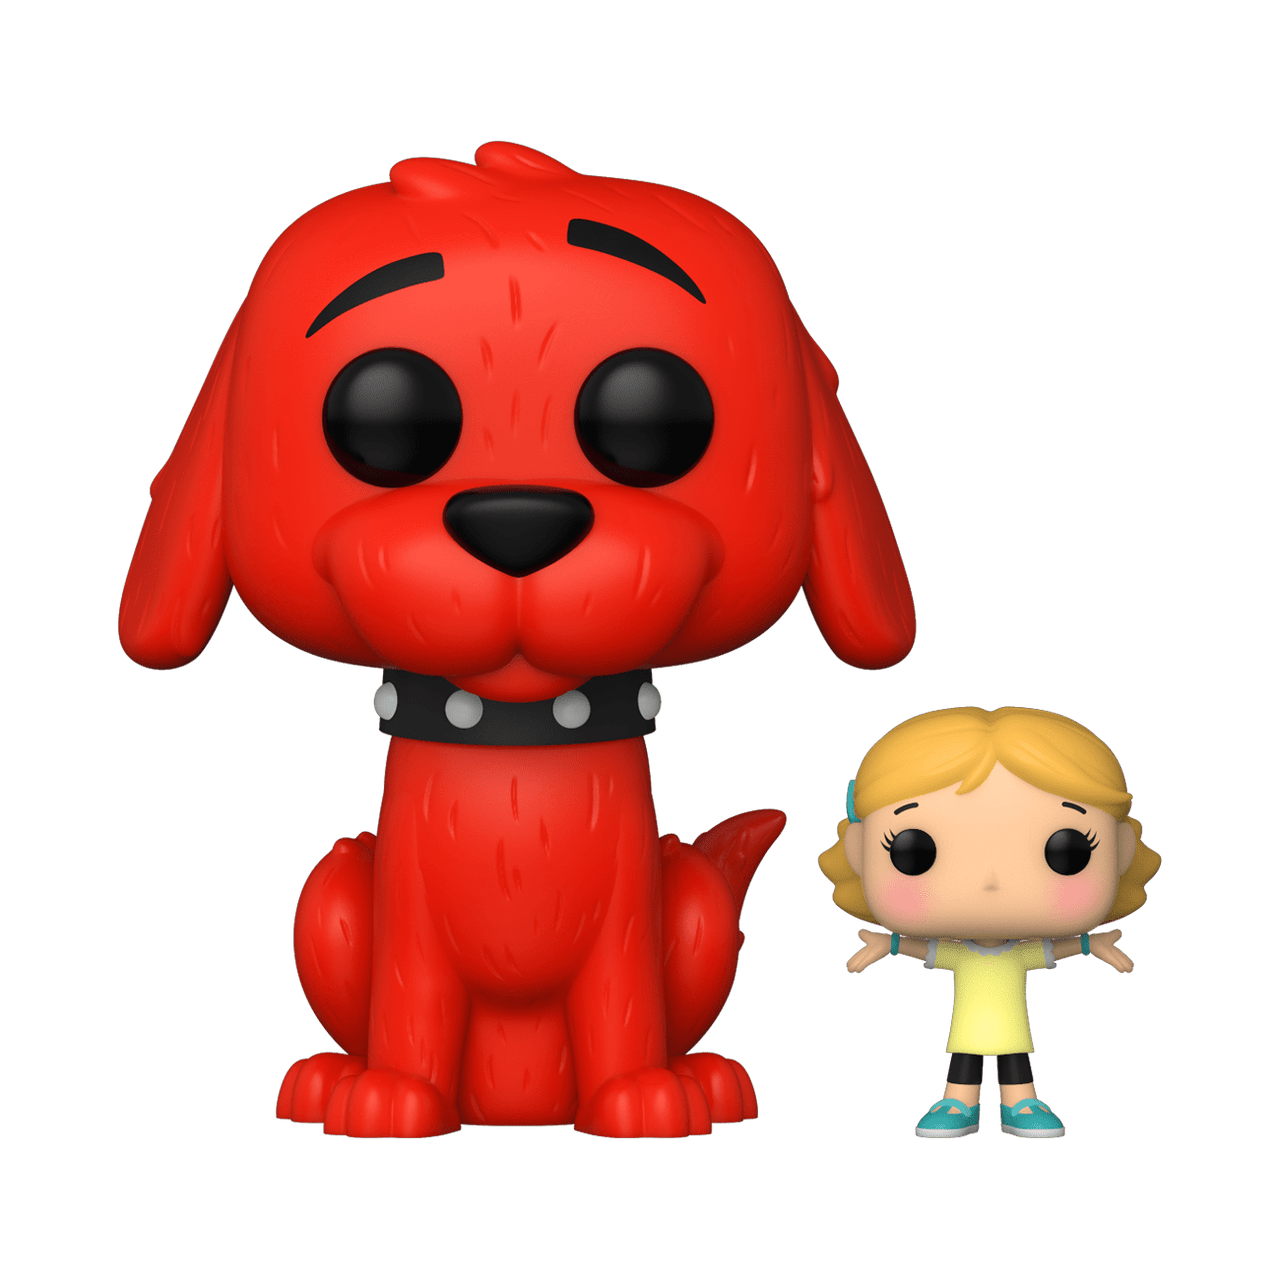 POP! Books ~ Clifford The Big Red Dog ~ Clifford with Emily #27